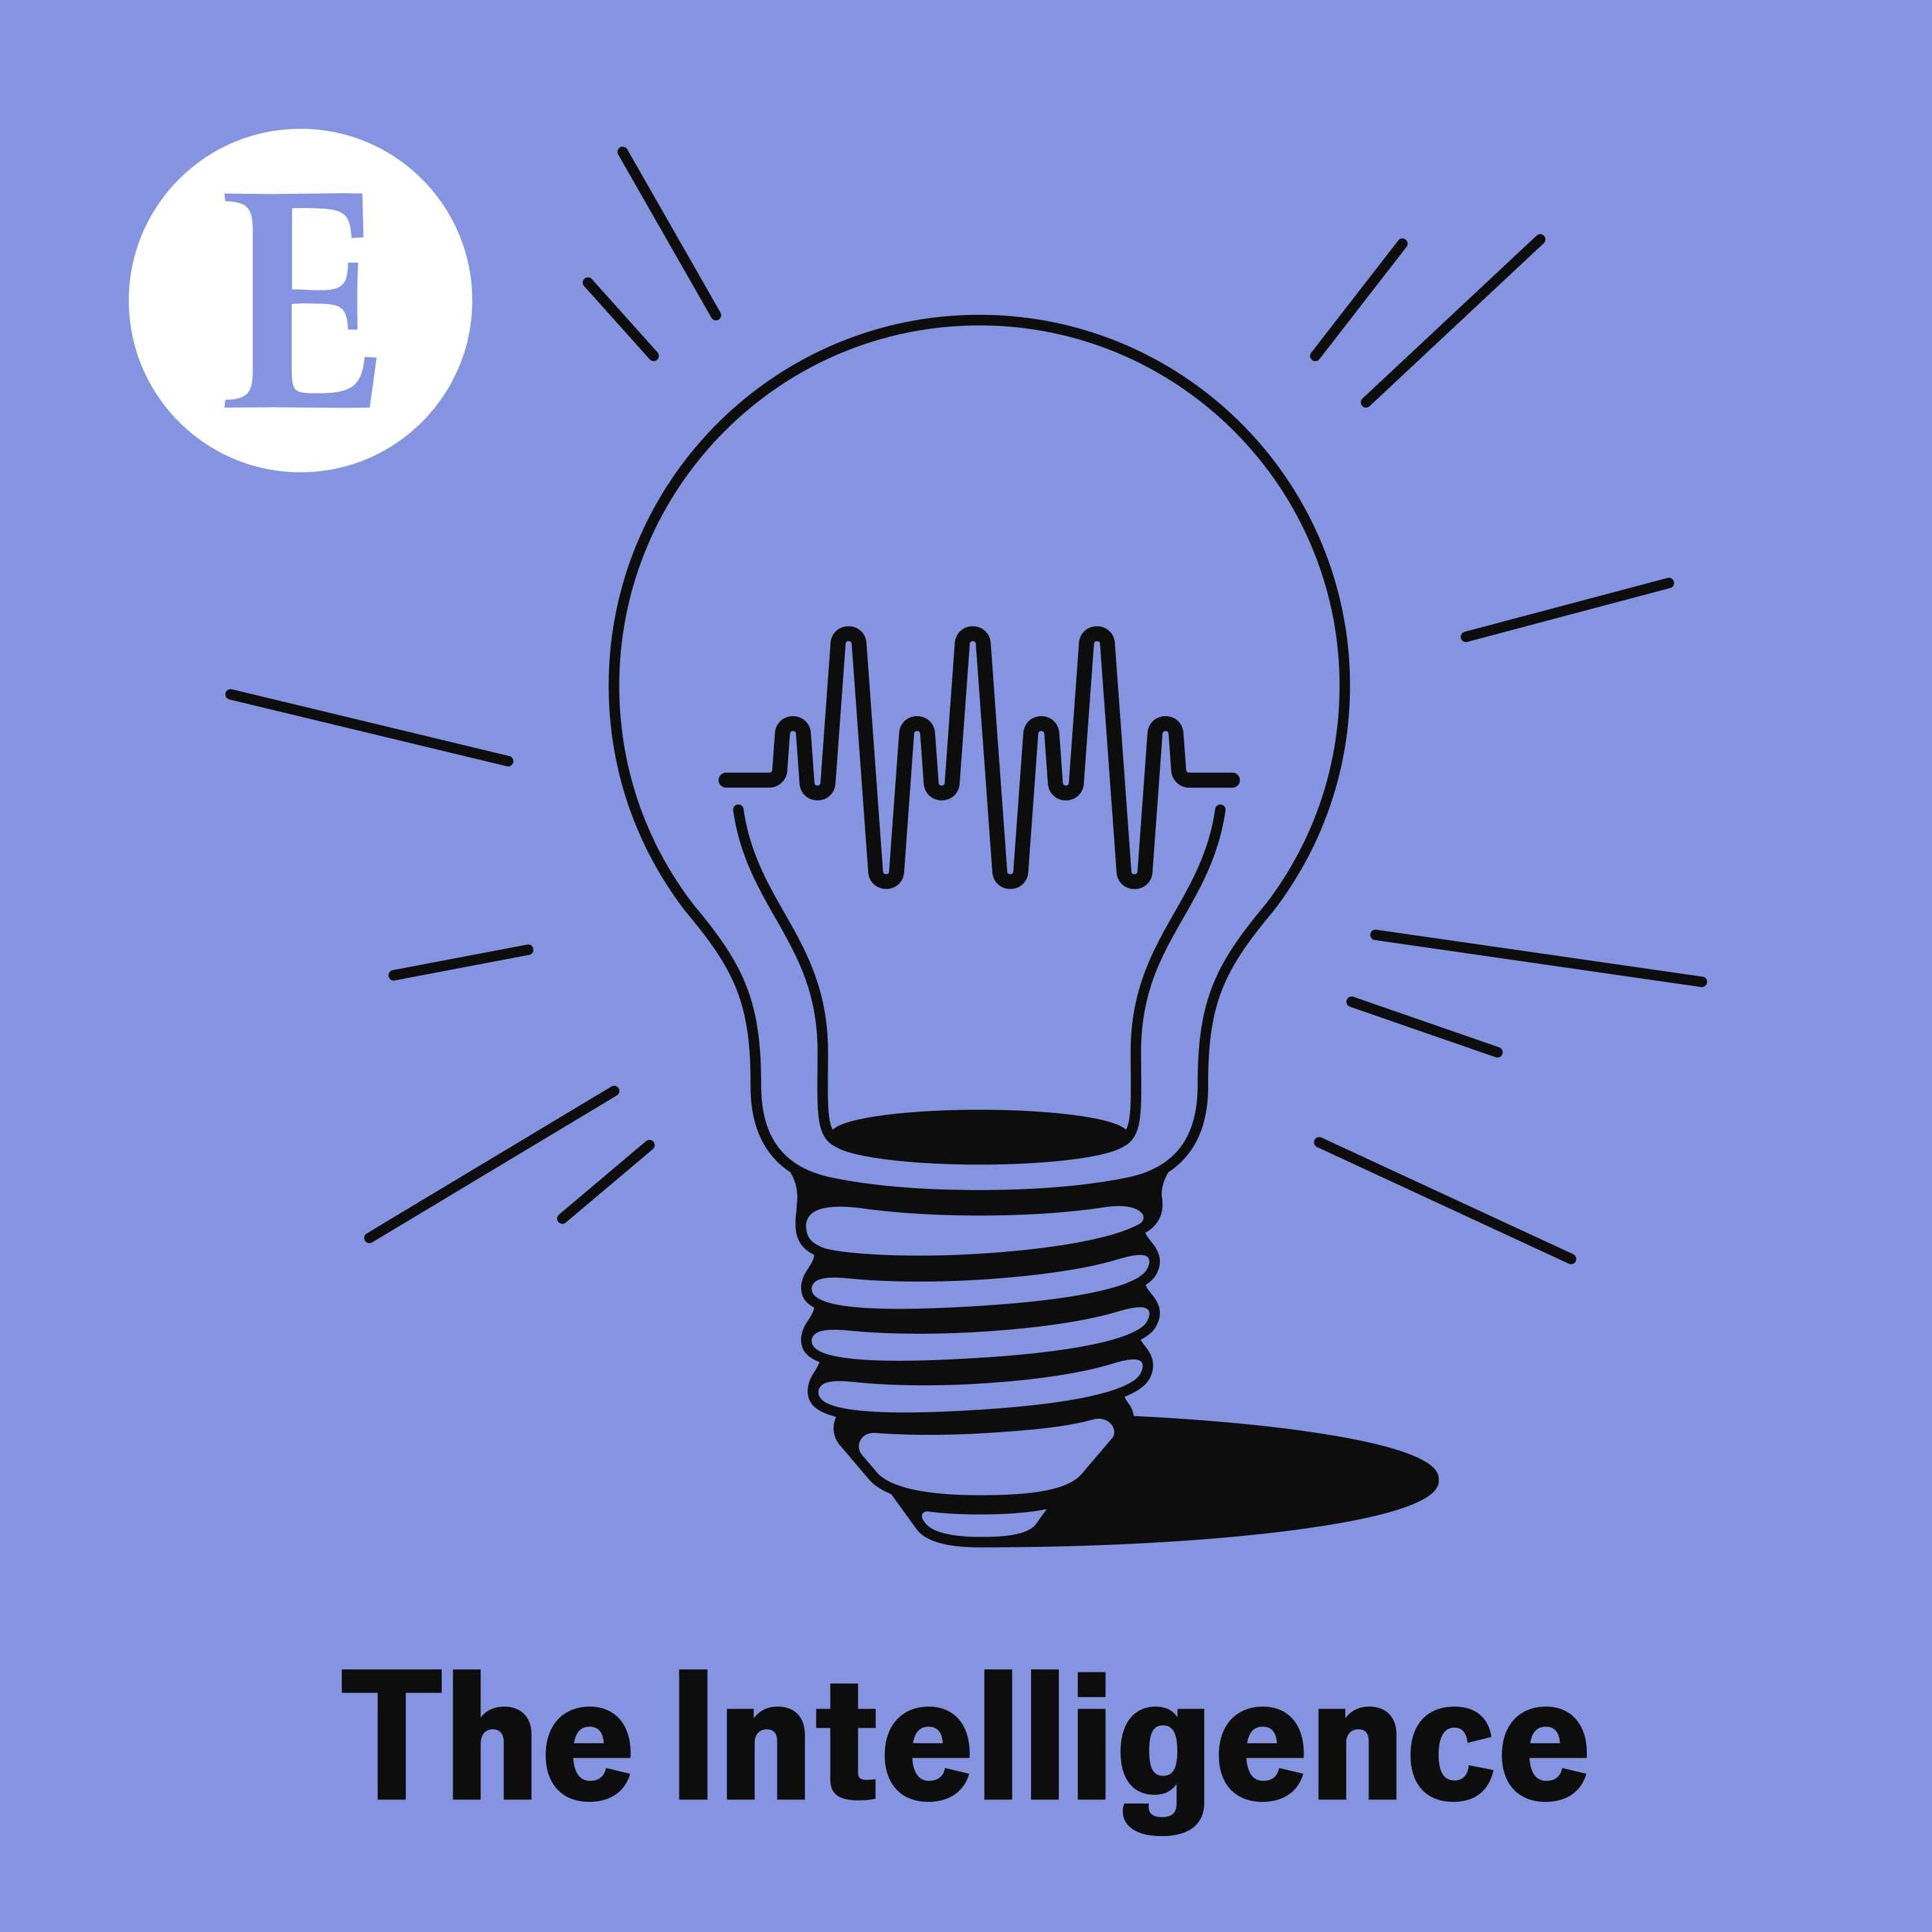 The Intelligence from The Economist • Listen on Fountain